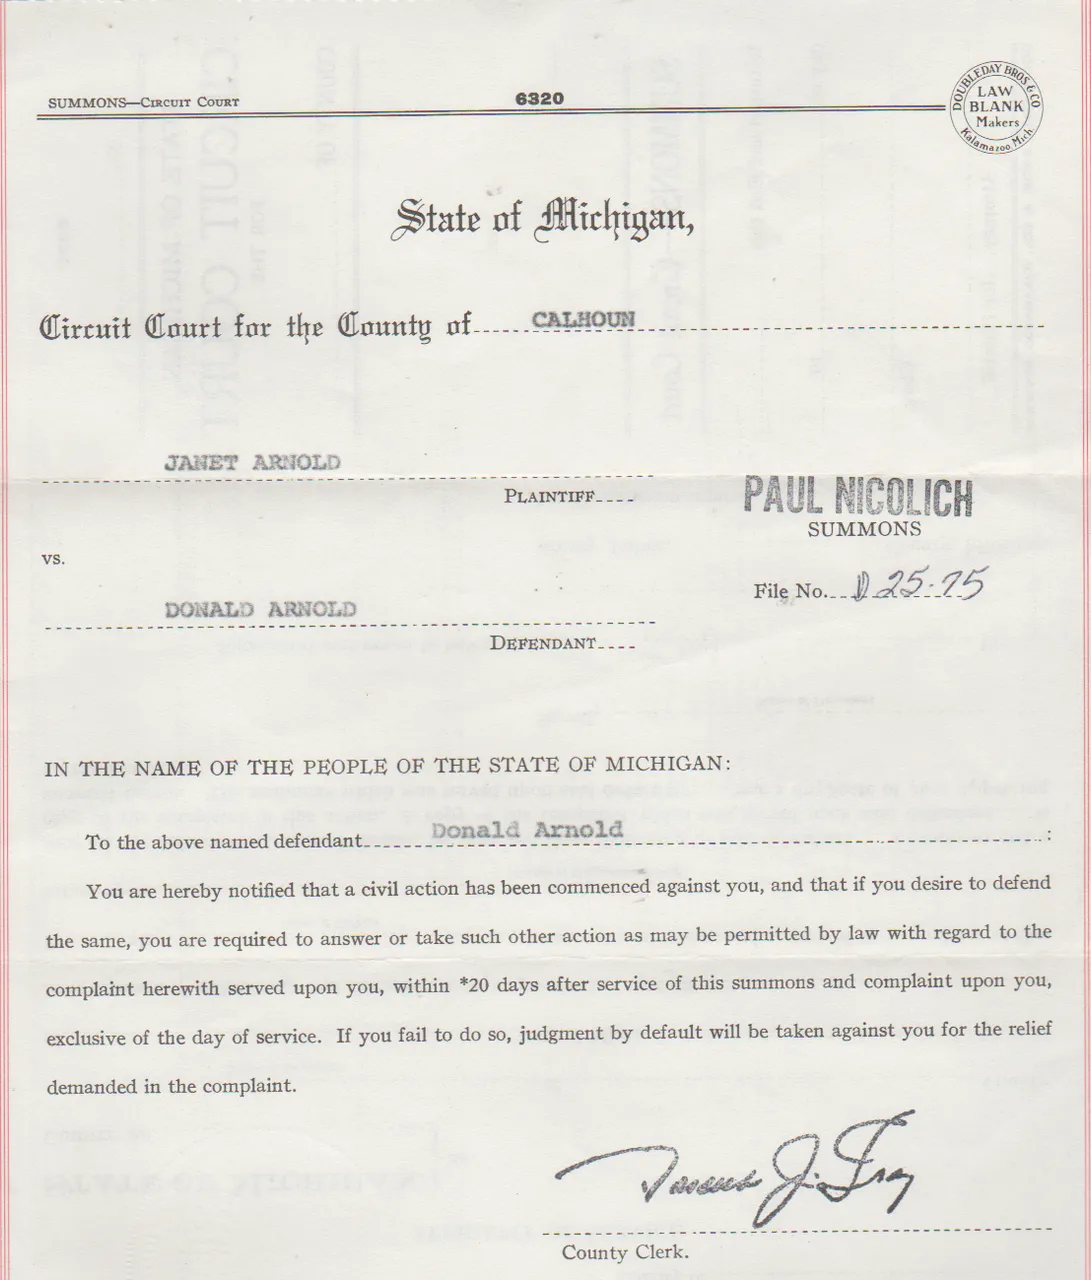 1978-02-10 - Friday - Don Arnold, Janet Arnold - Michigan Circuit Court, marriage, possibly a divorce, affidavit of service-1.png